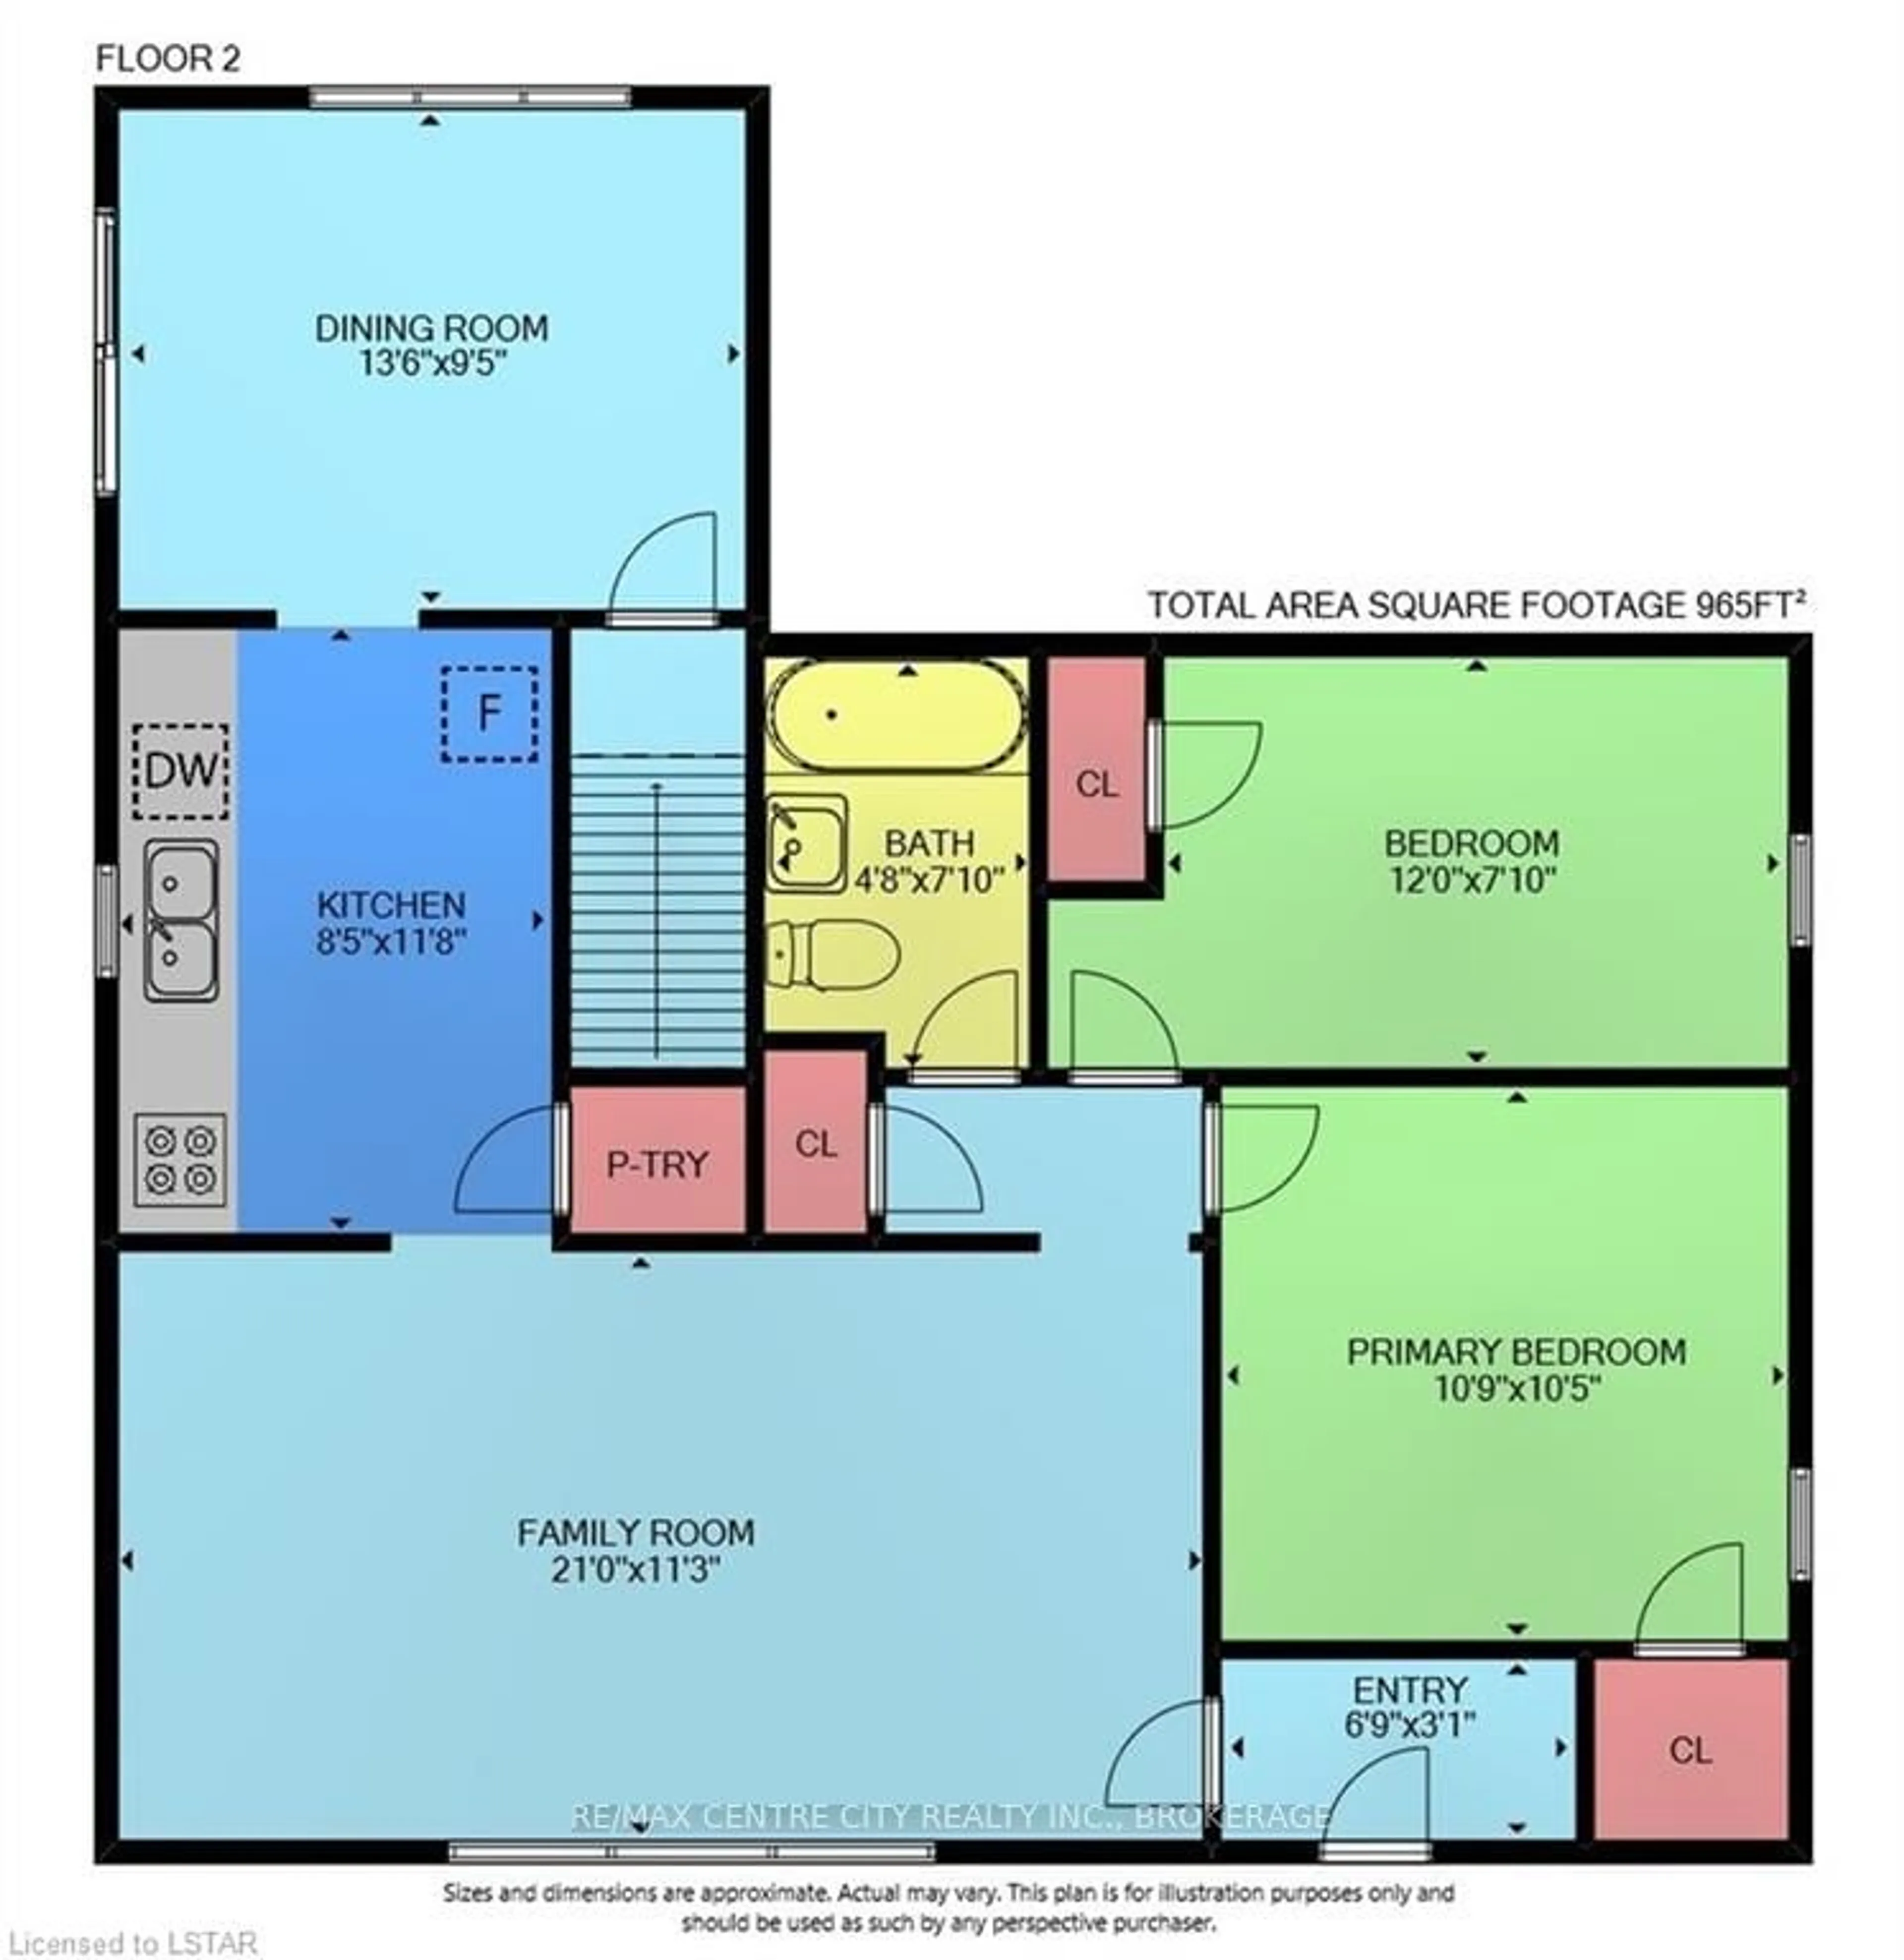 Floor plan for 35 Greenfield Dr, London Ontario N6E 1M8